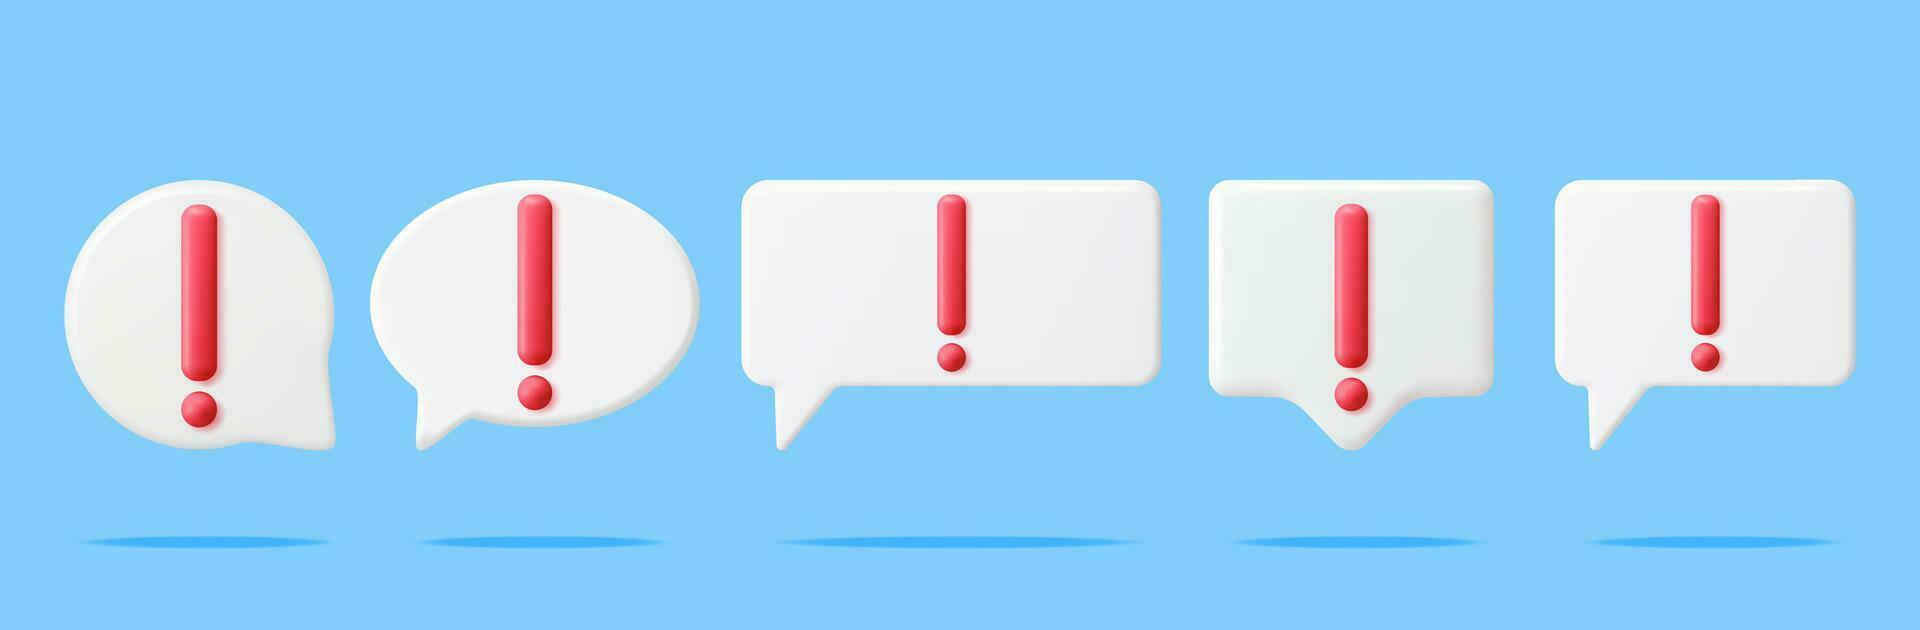 3D Red Exclamation Mark in White Pin Set Isolated. Attention Chat Speech Bubble Icon. Alert and Alarm Symbol. Social Media Network Notification Reminder. Vector Illustration